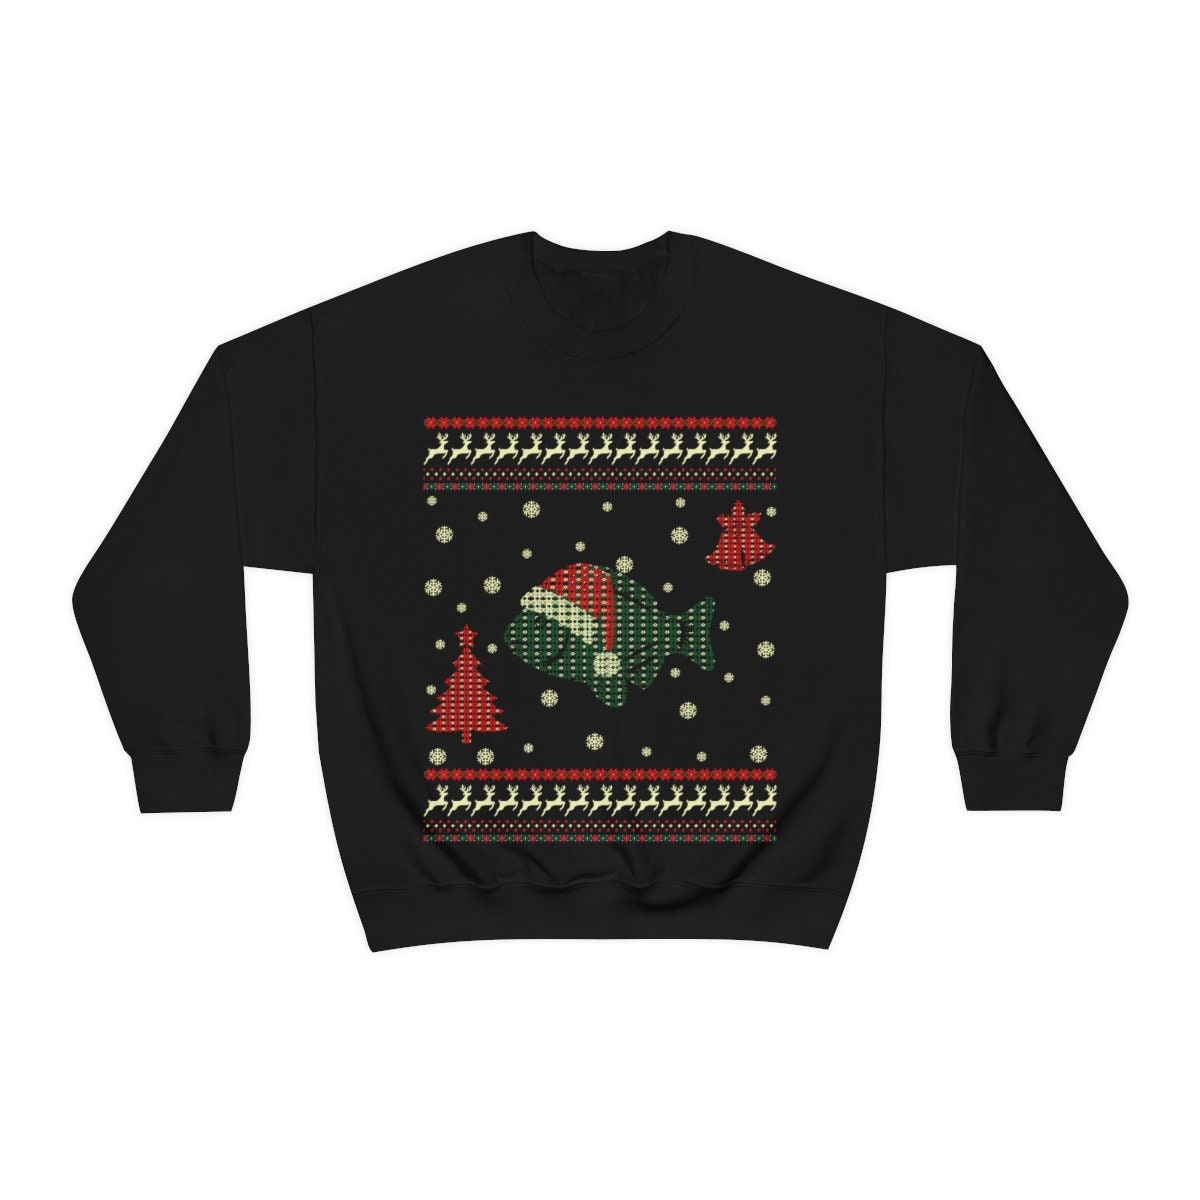 Merry fishmas long sleeve, funny ugly sweater, fishing christmas sweater  sold by Gopi Nath, SKU 38575761